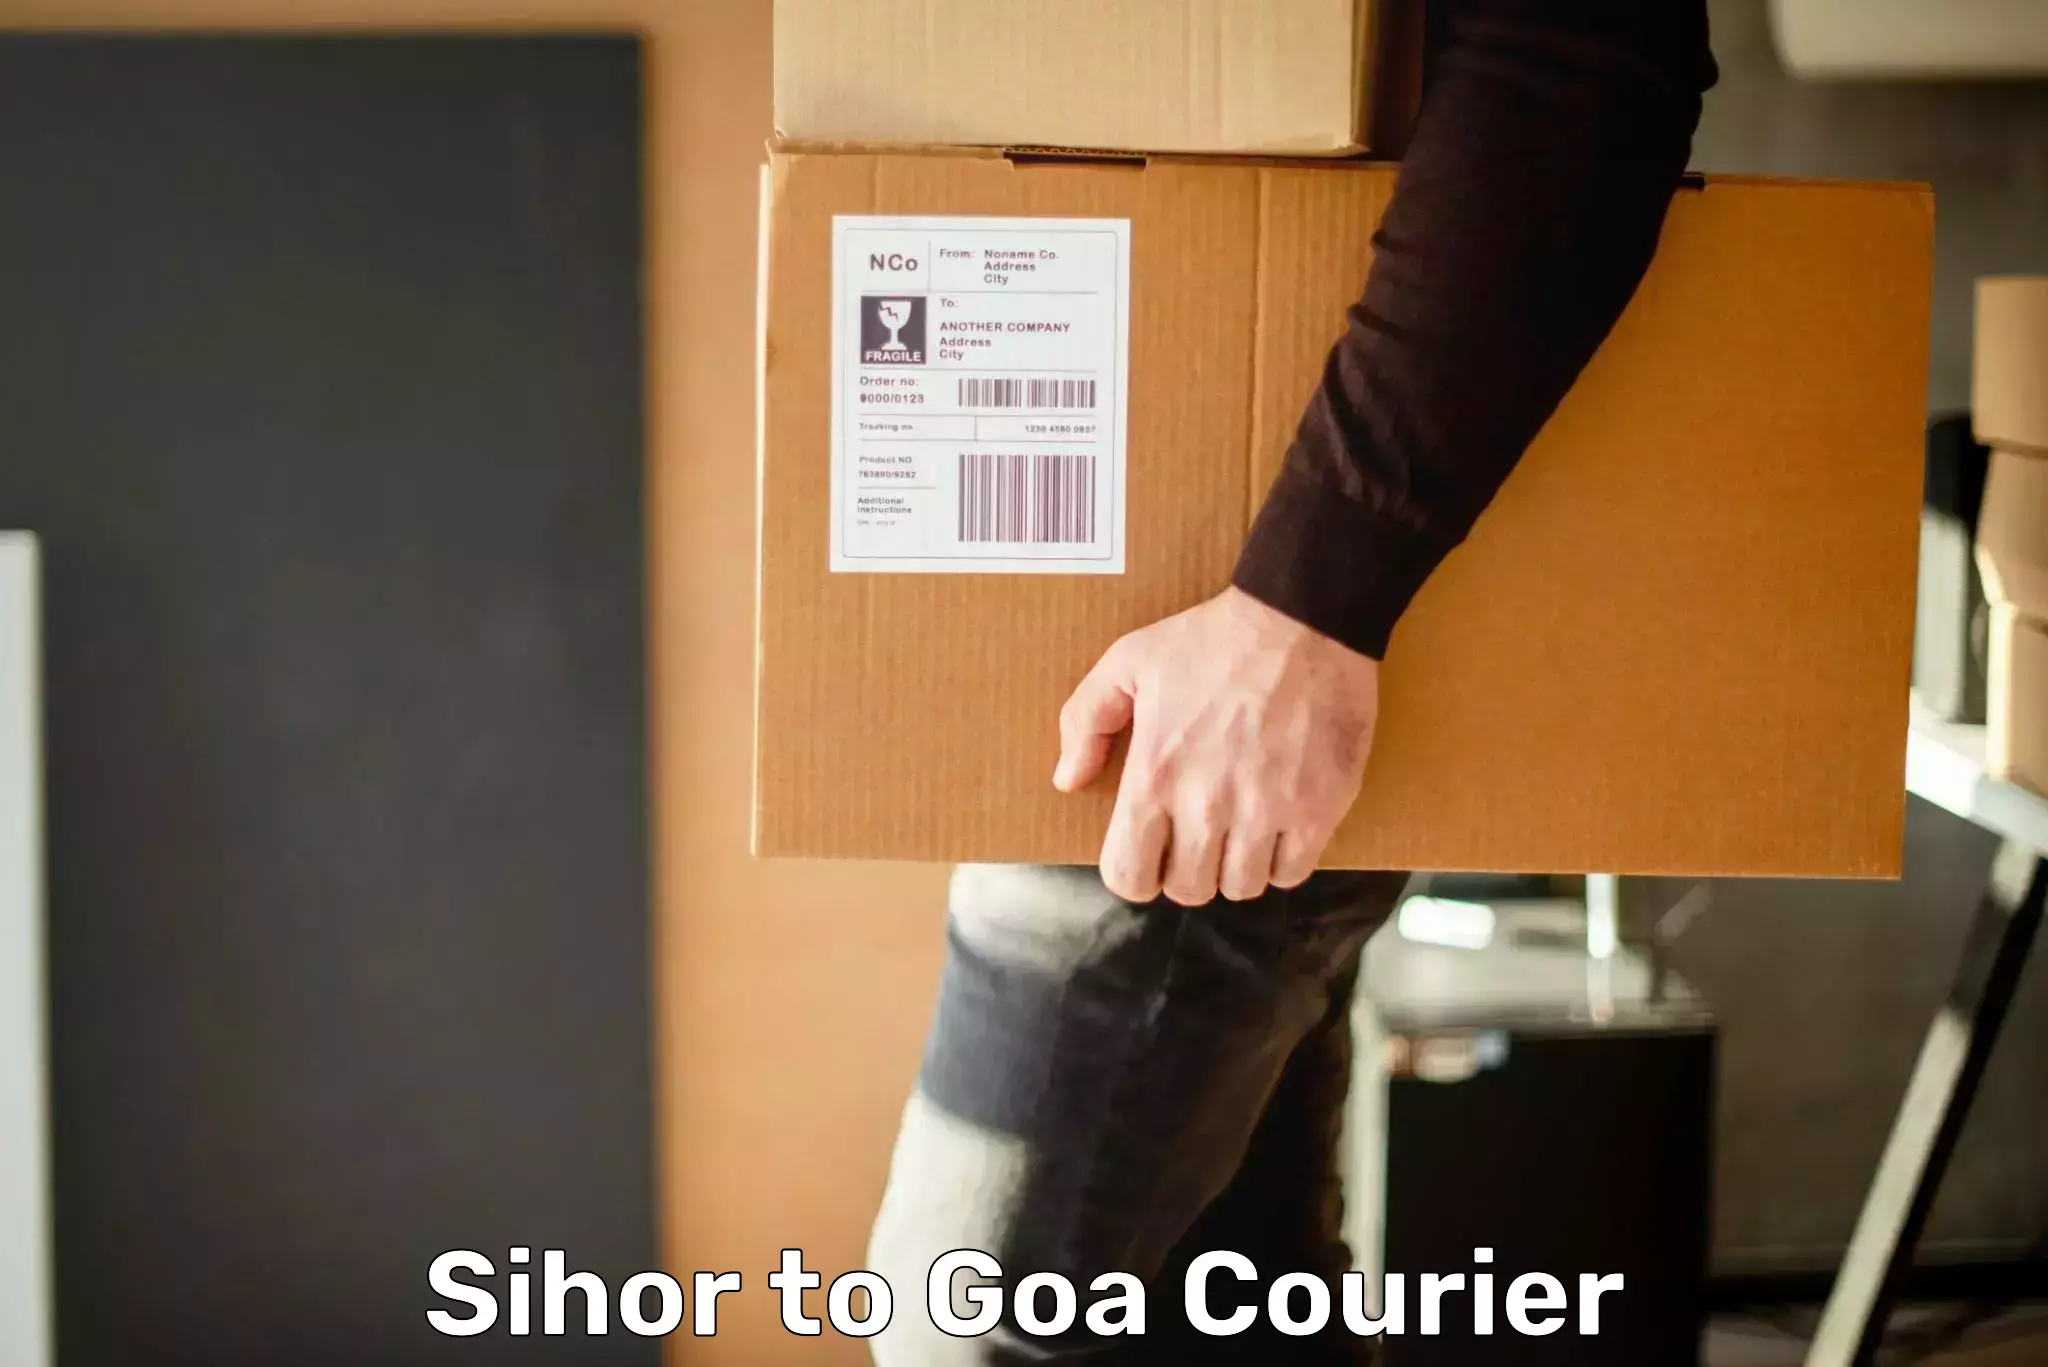 24-hour courier service Sihor to Goa